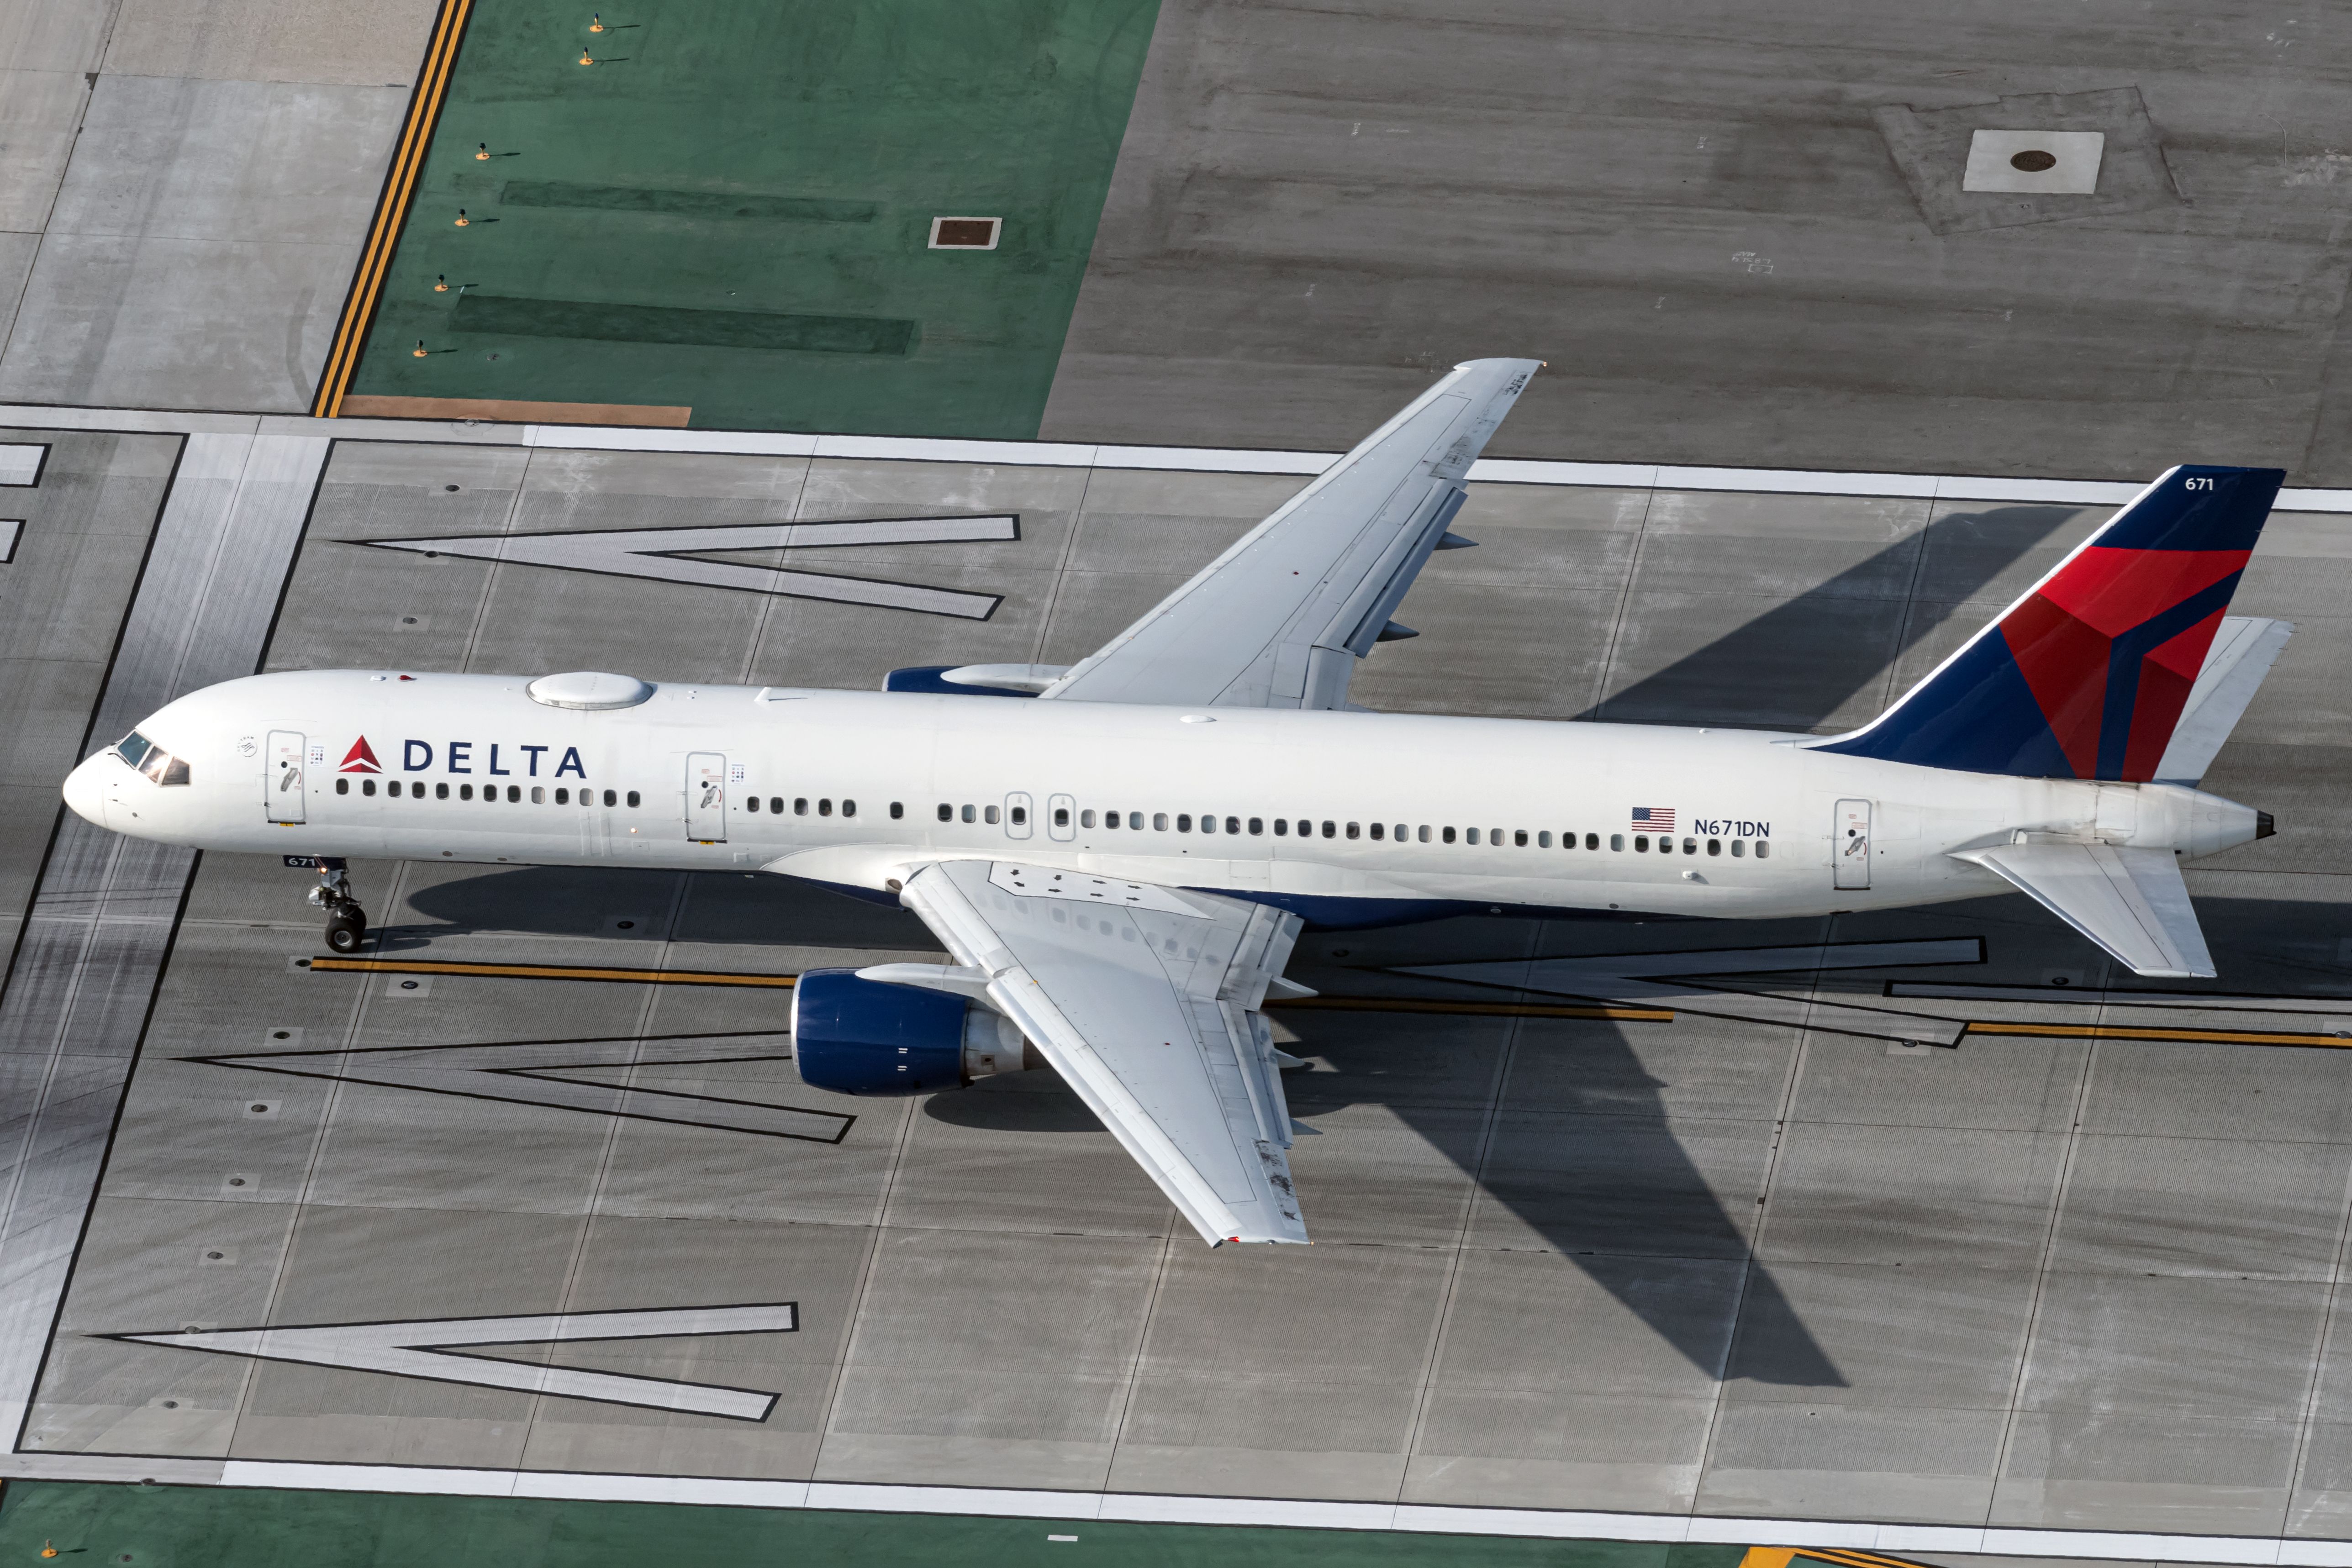 The Tiers of the Delta Air Lines SkyMiles Program